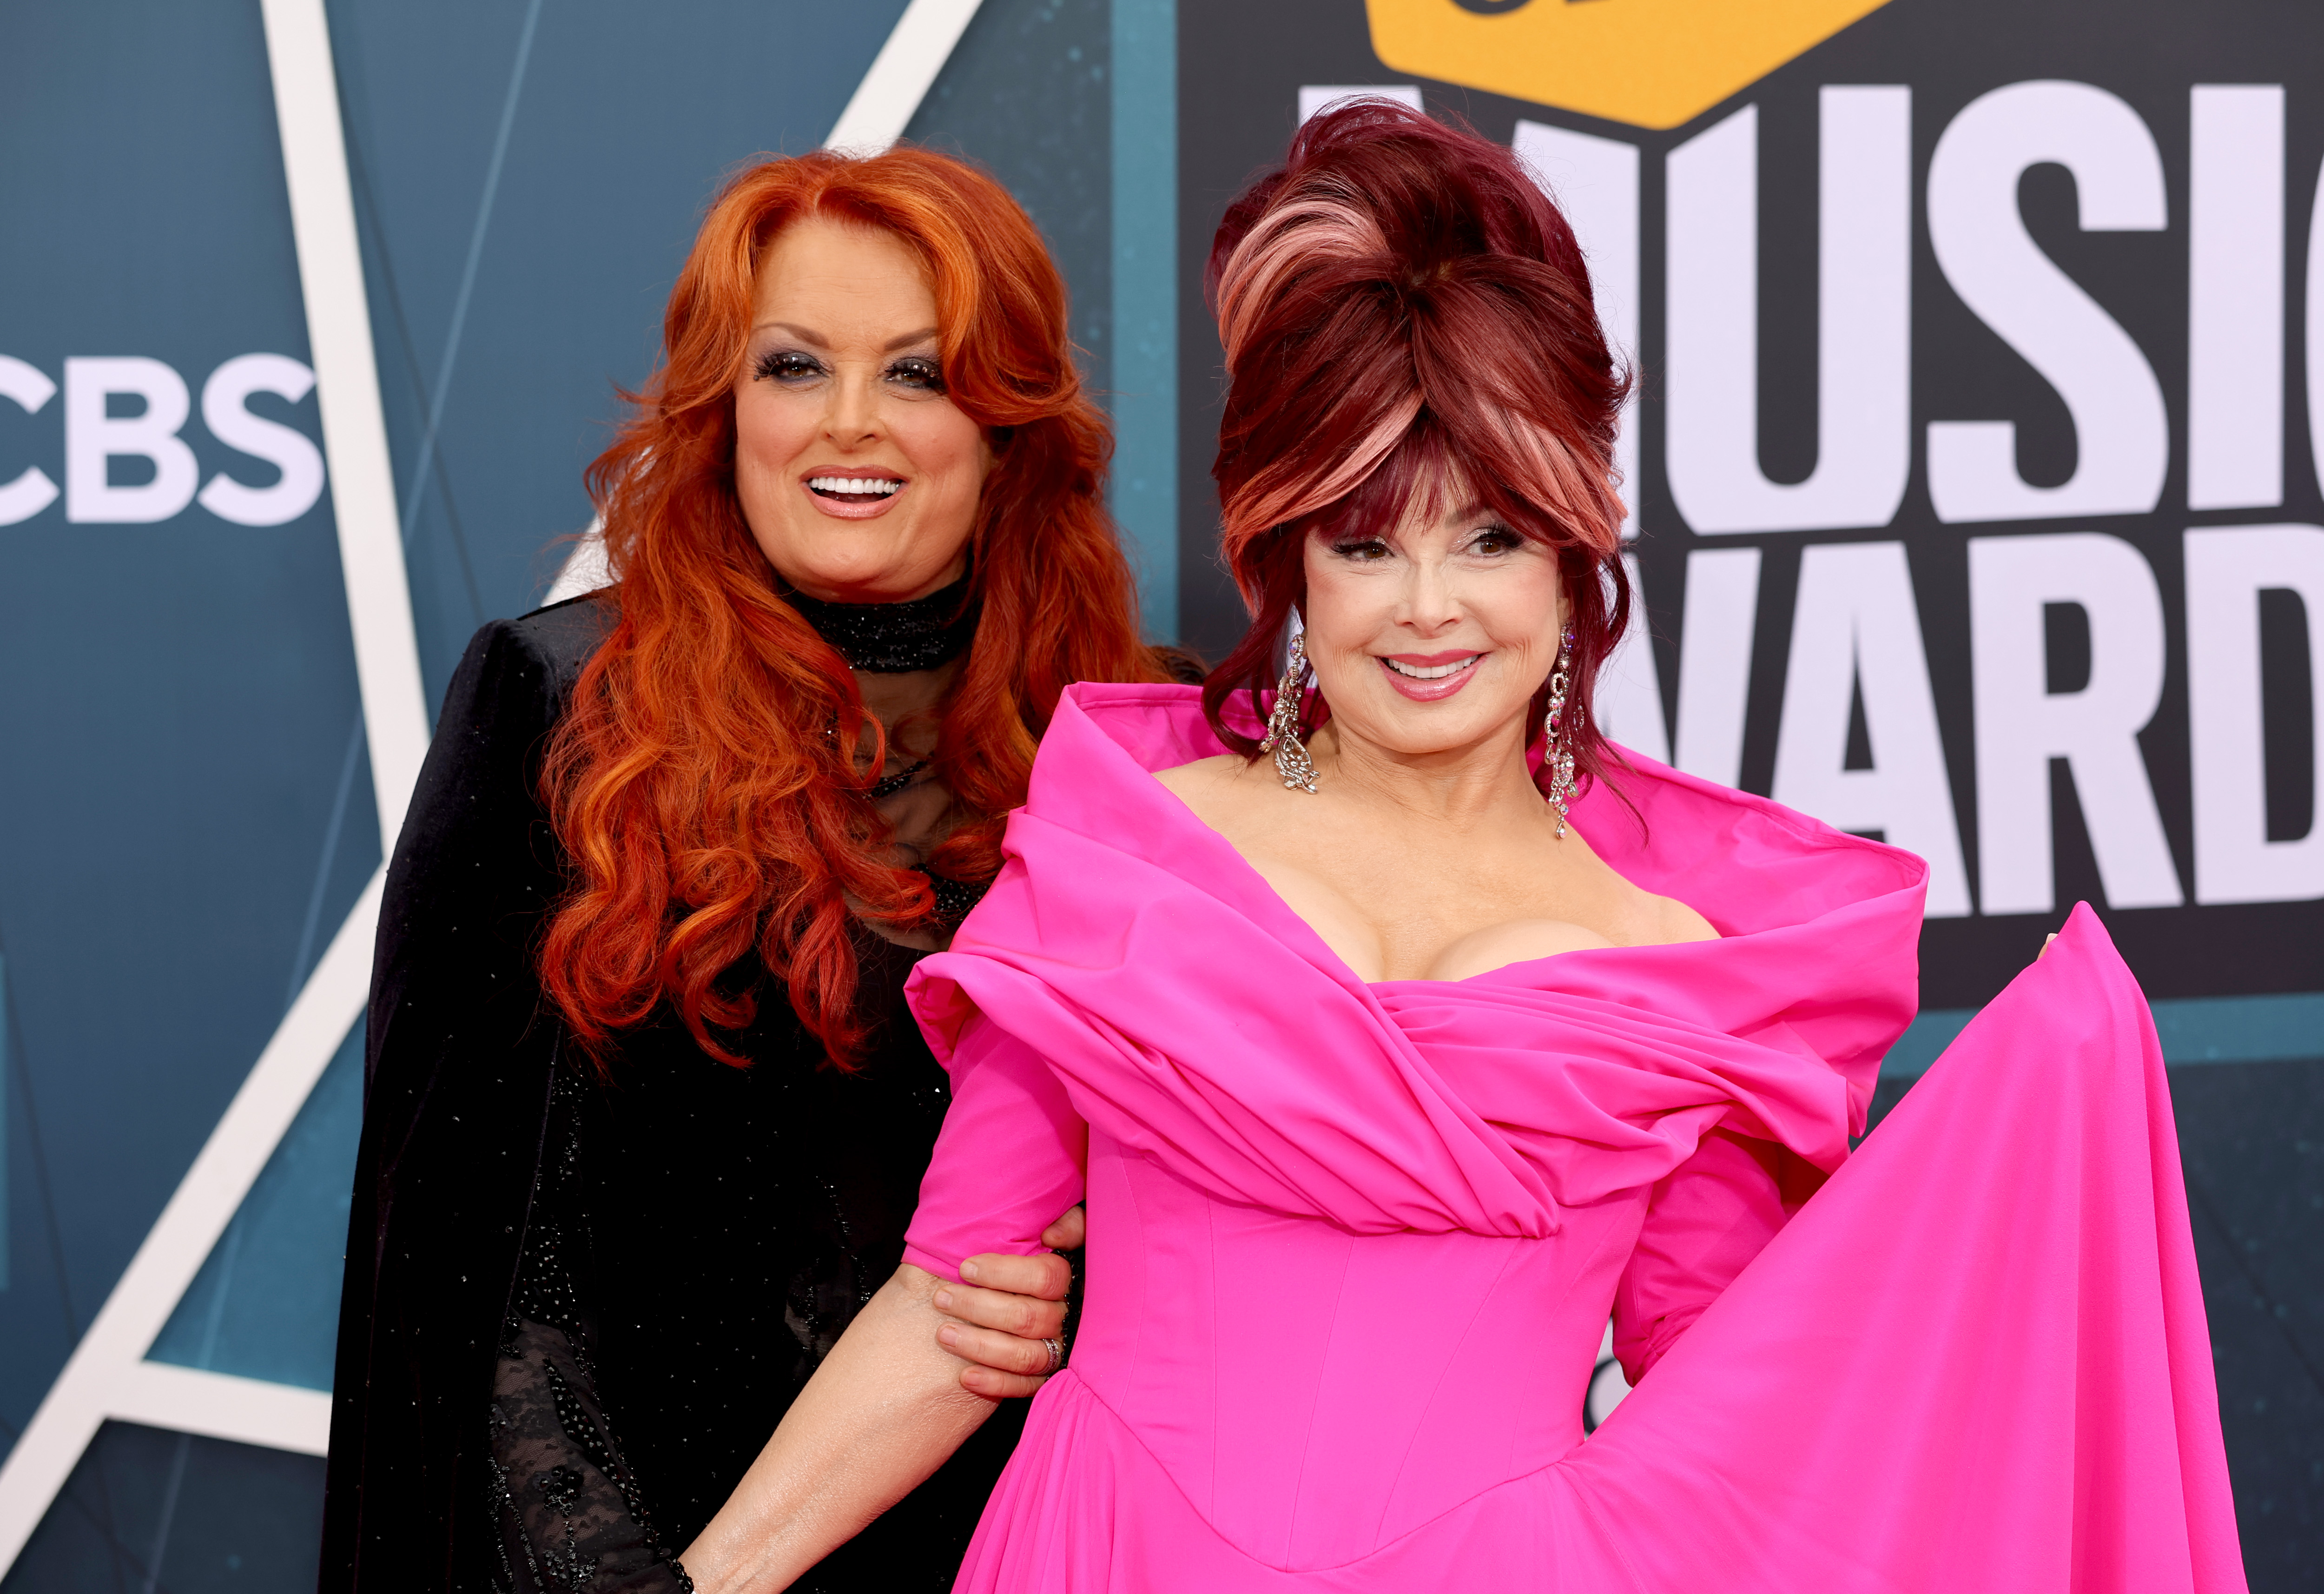 Wynonna Judd and Naomi Judd attend the 2022 CMT Music Awards on April 11, 2022 in Nashville, Tennessee | Source: Getty Images